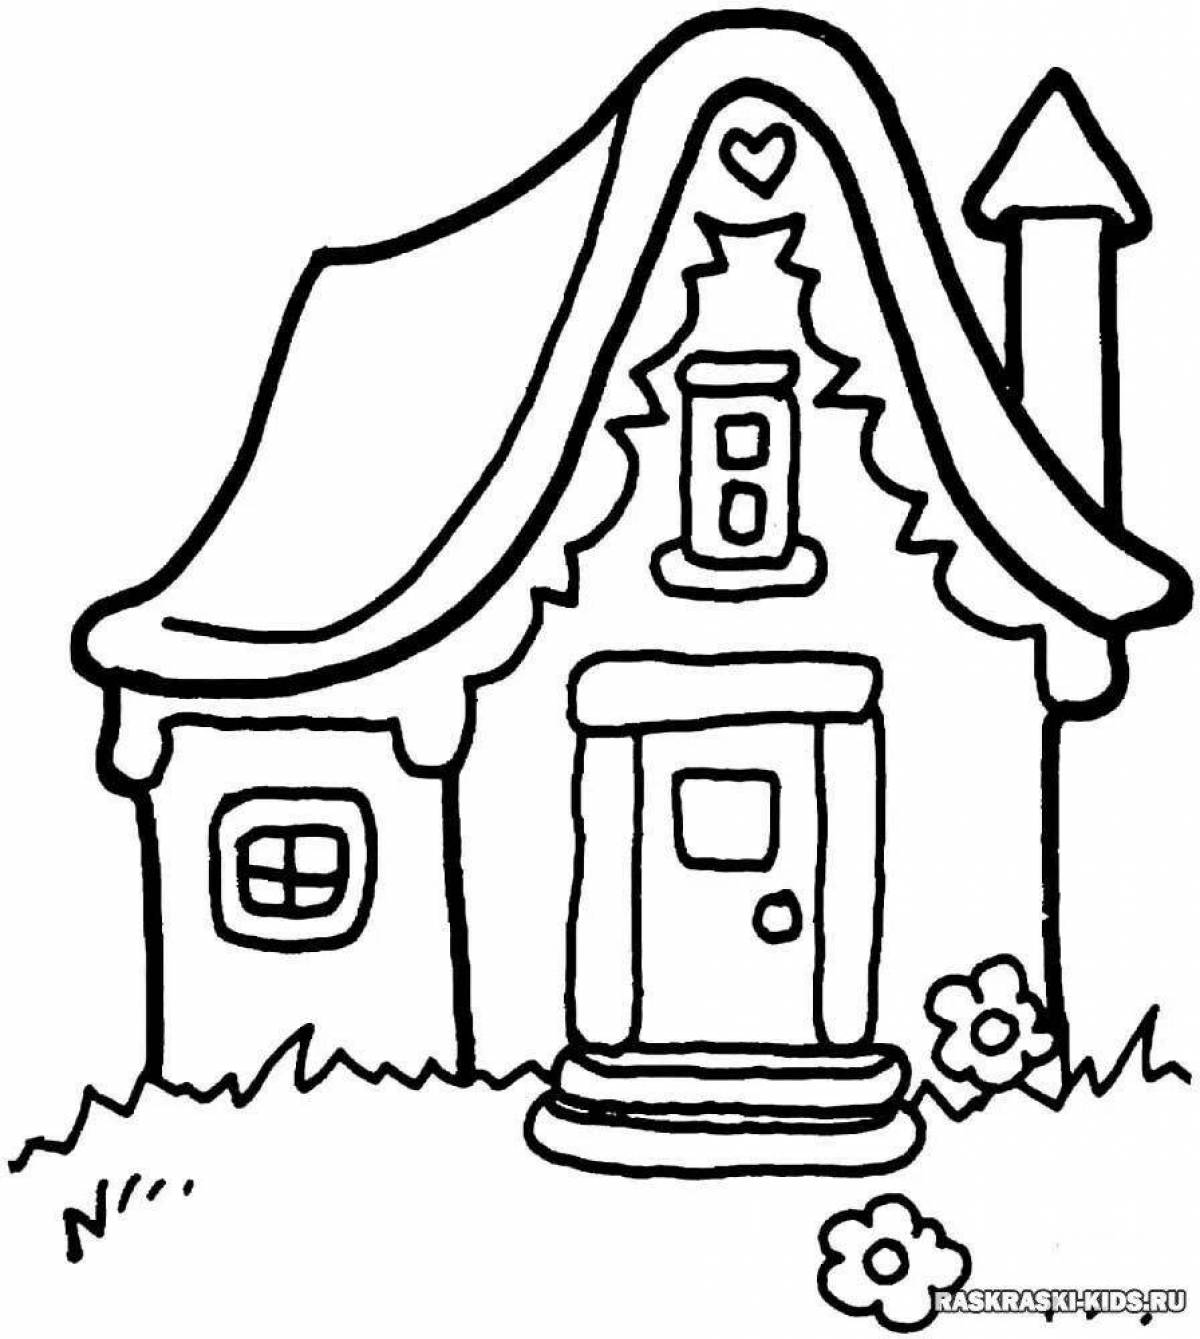 Wonderful house coloring book for kids